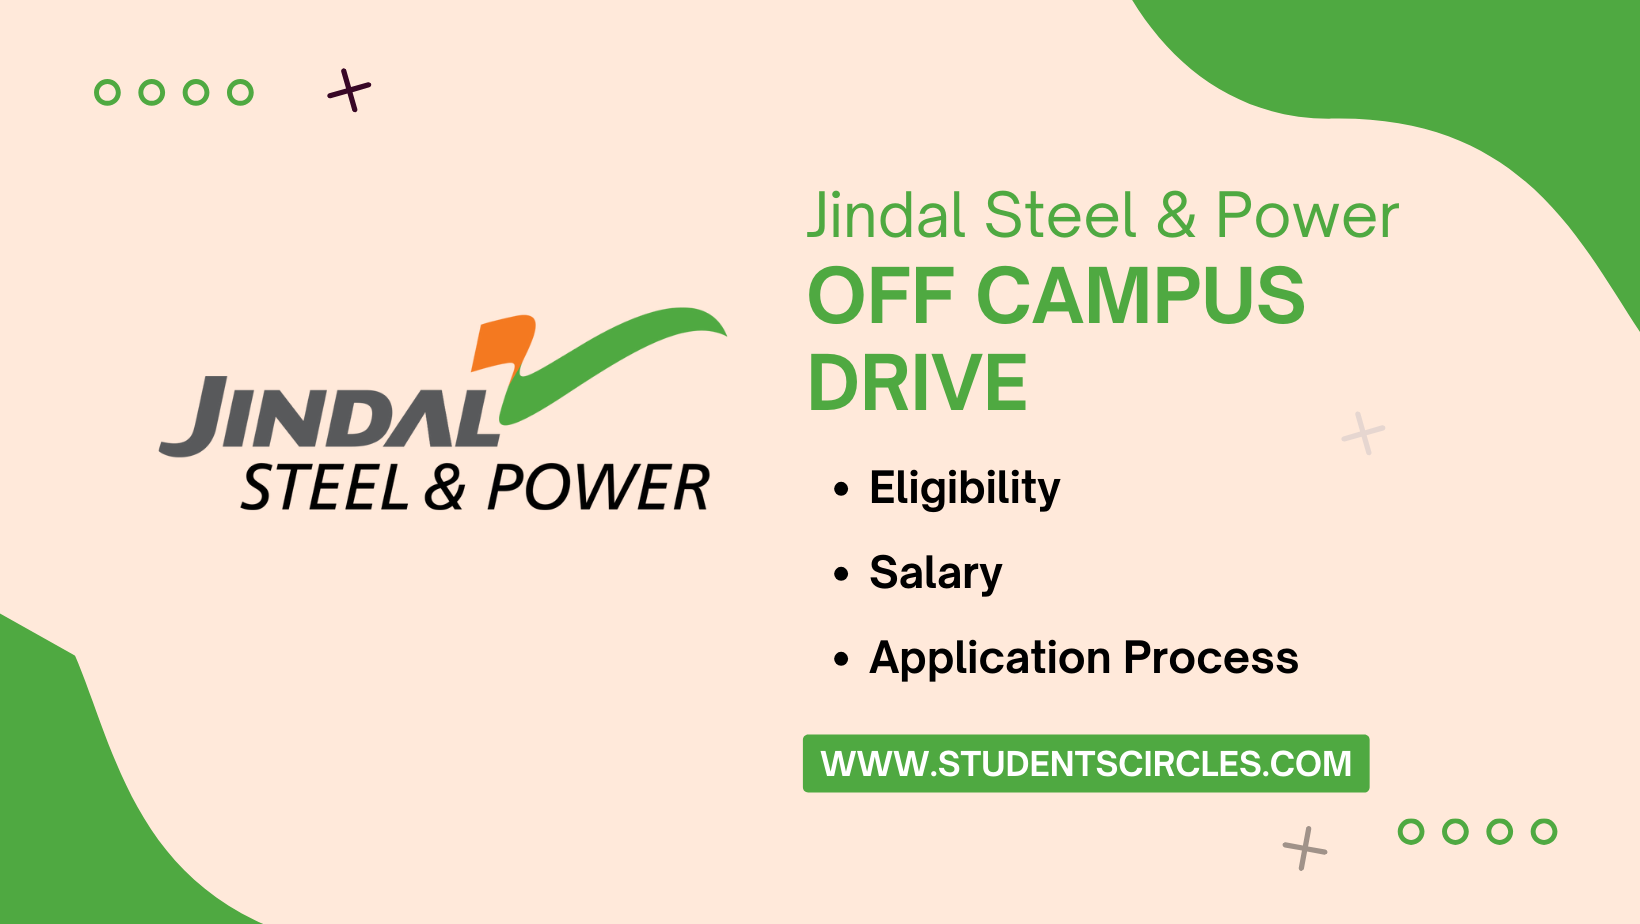 Jindal Steel & Power Off Campus Drive